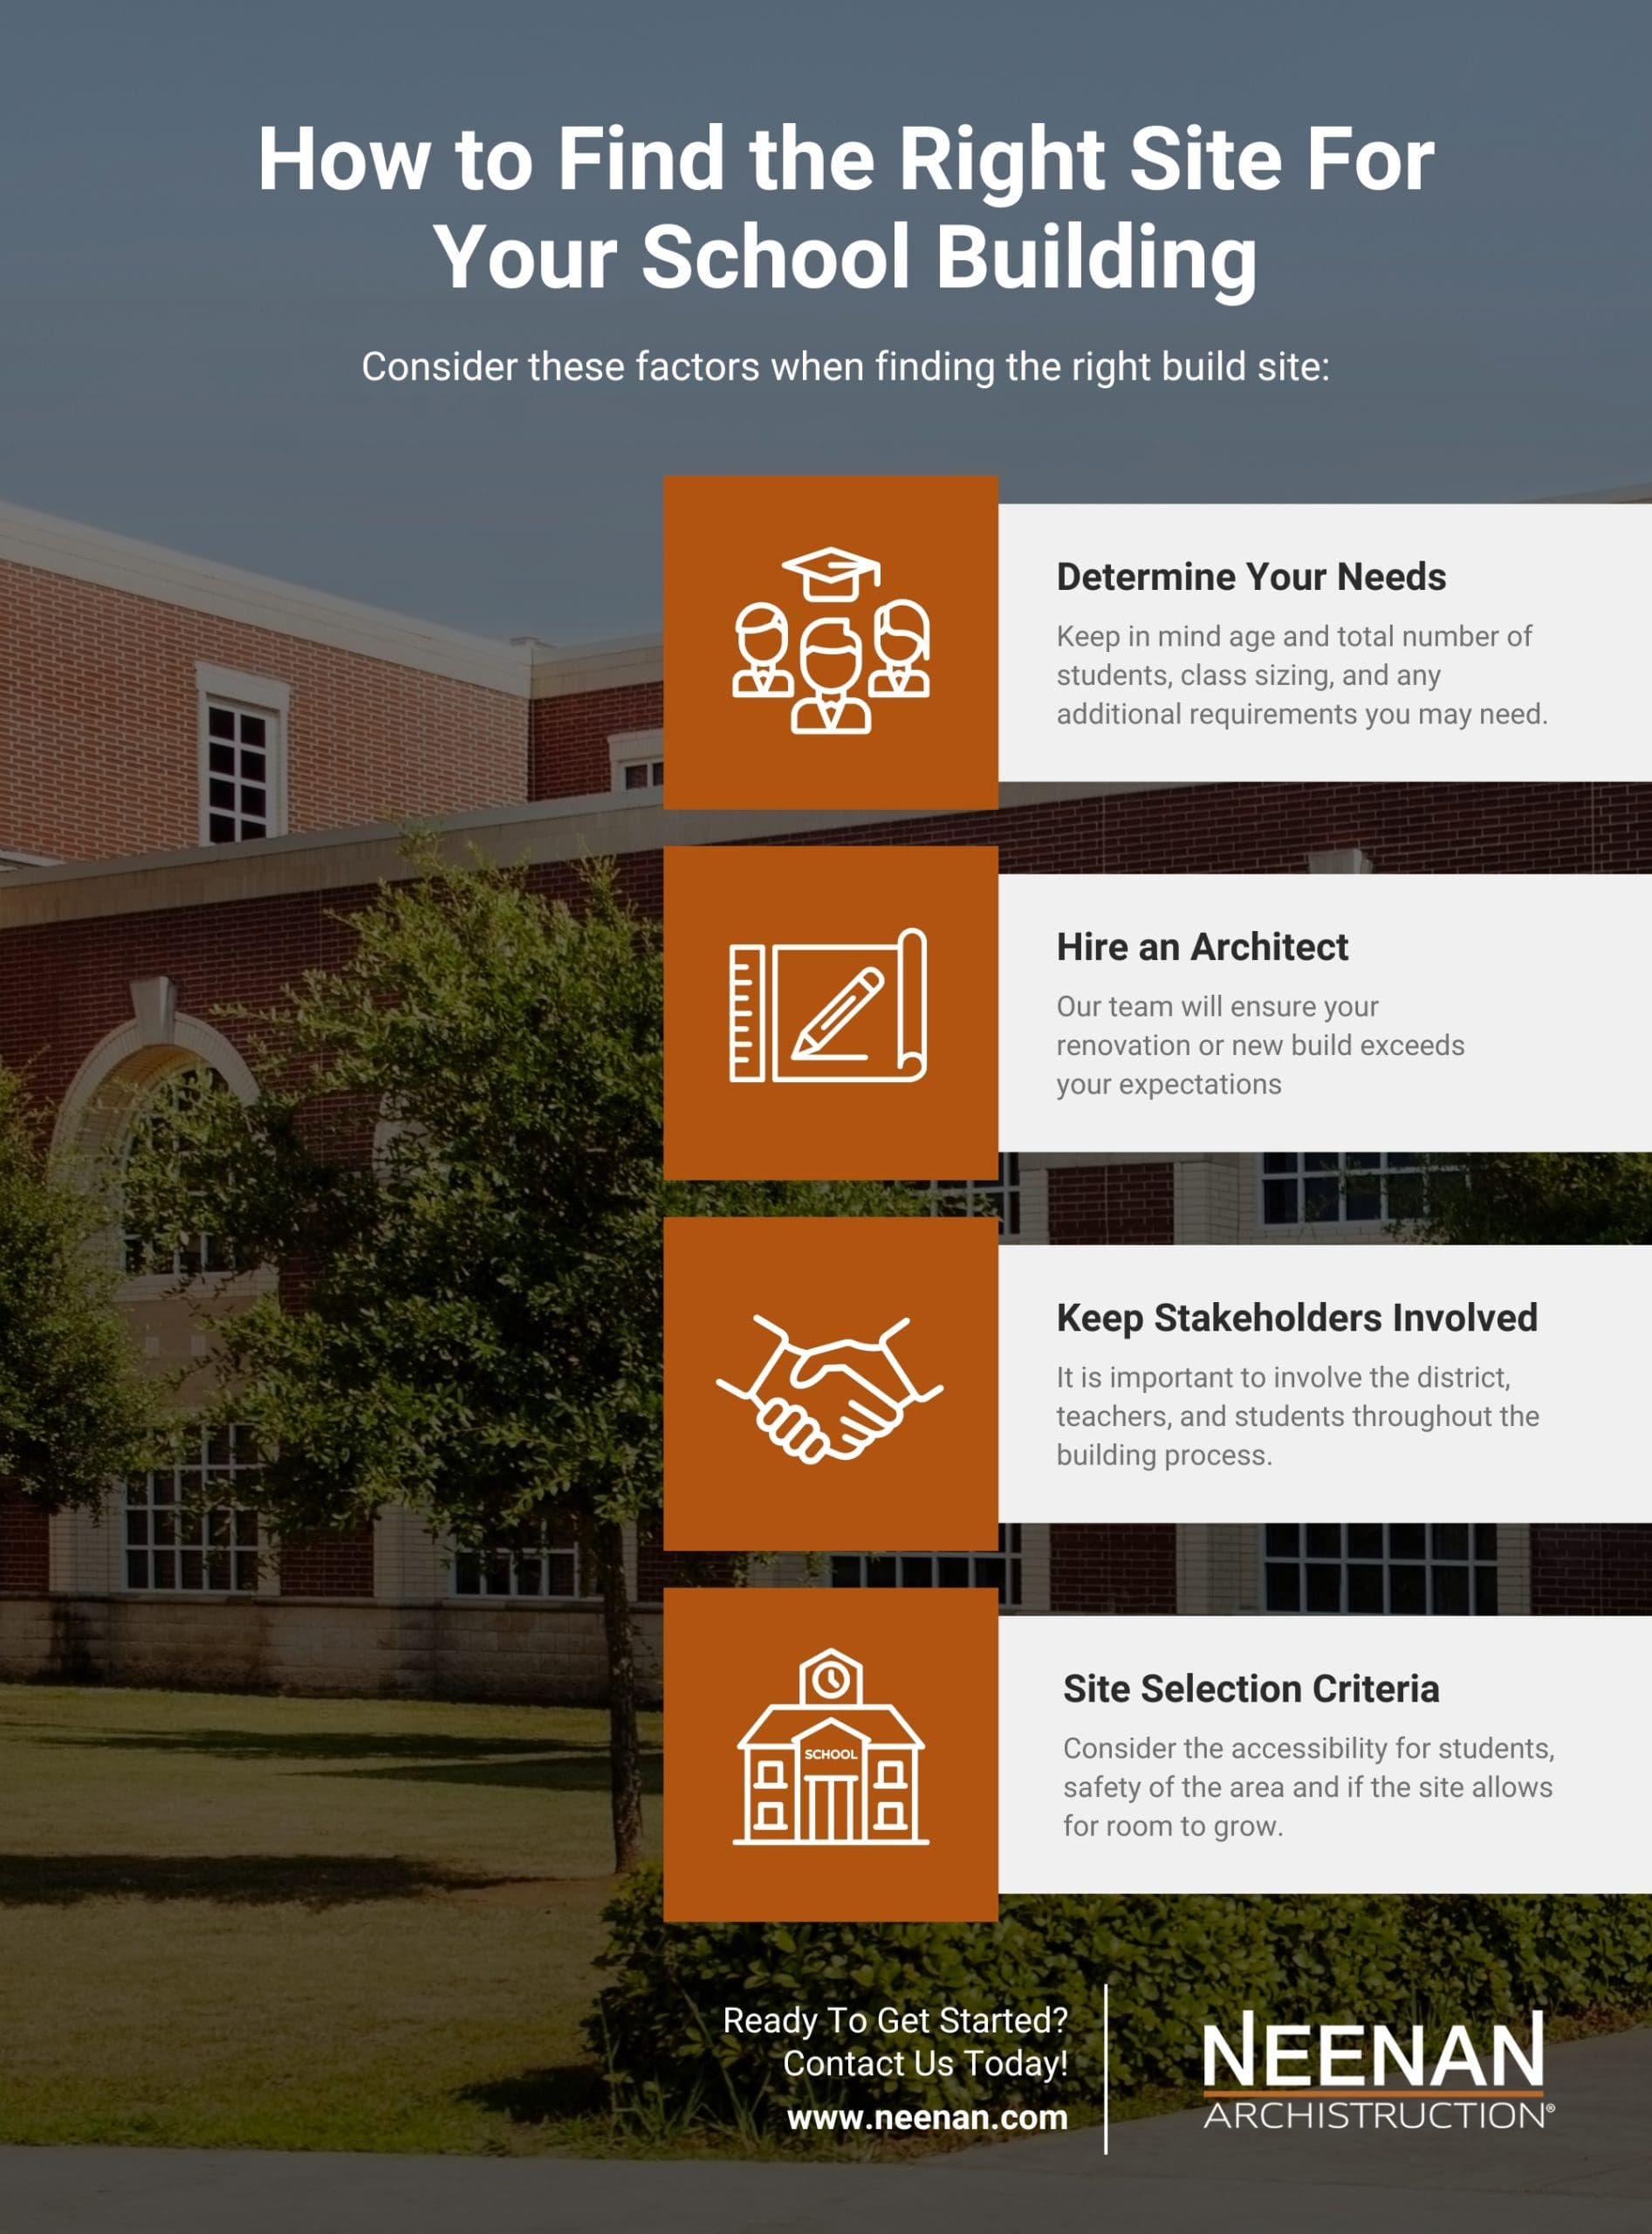 M28391 - The Neenan Company_Infographic - How to Find the Right Site For Your School Building (1)